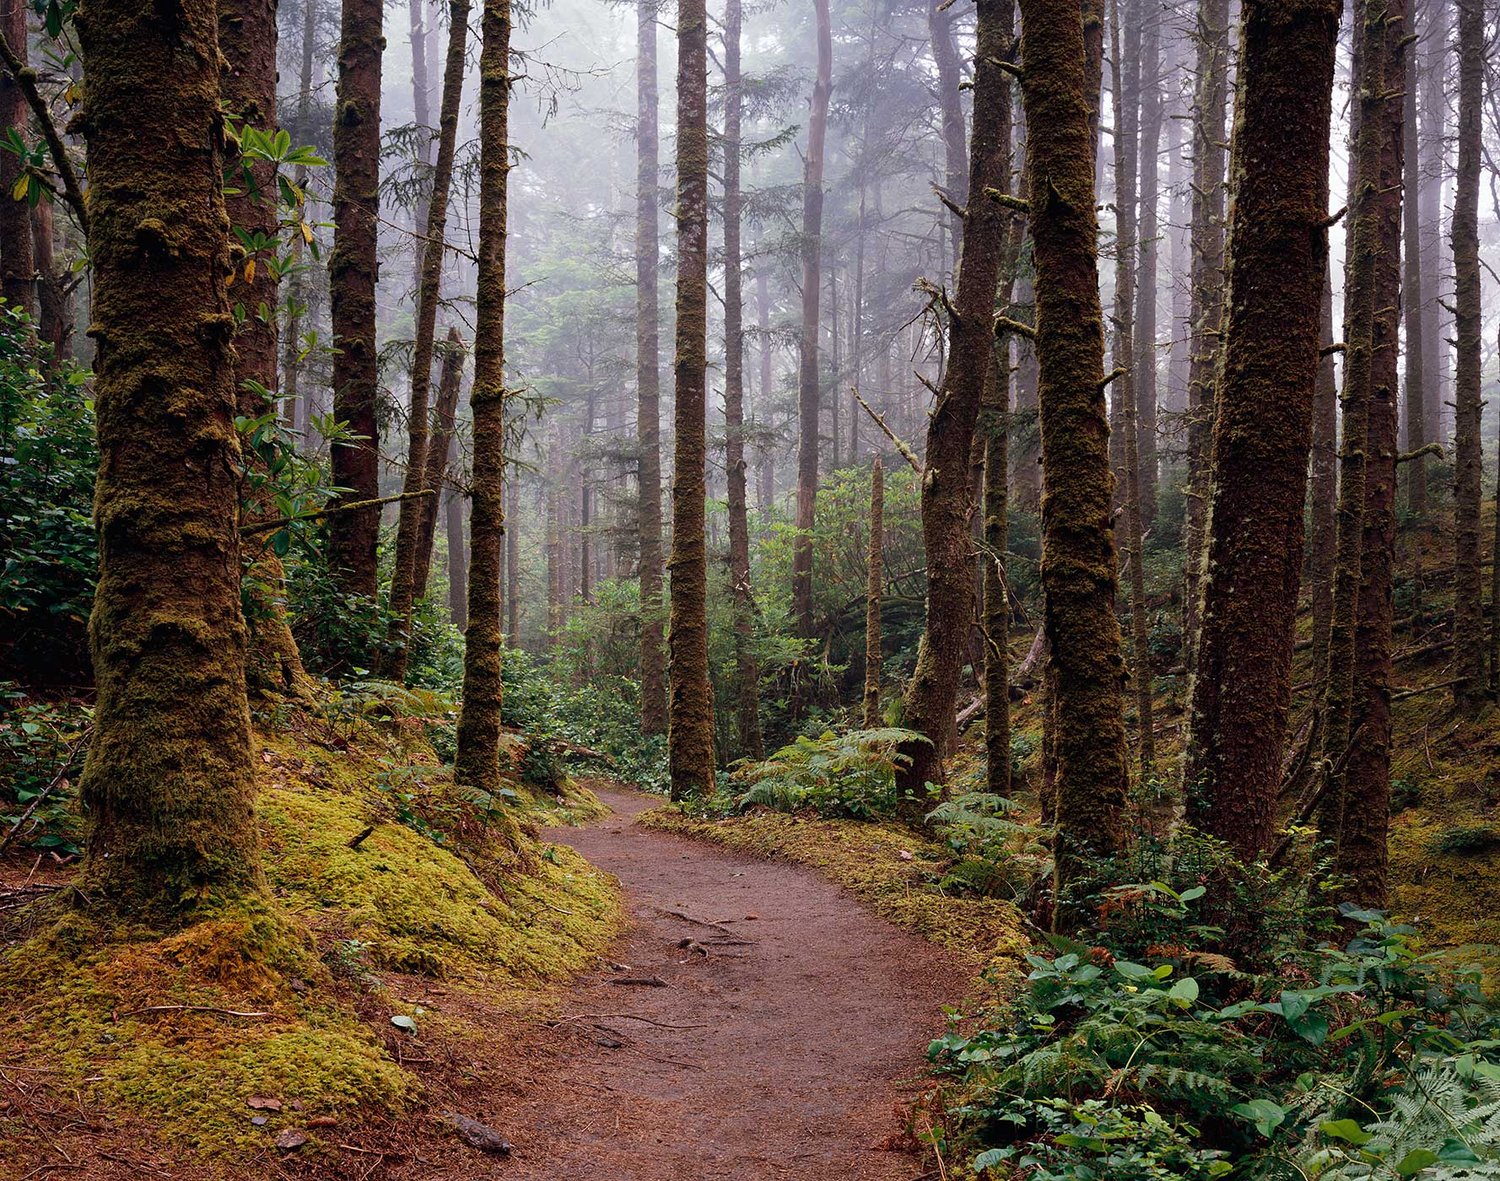 Image of The Hobbit Trail, Siuslaw National Forest, Oregon